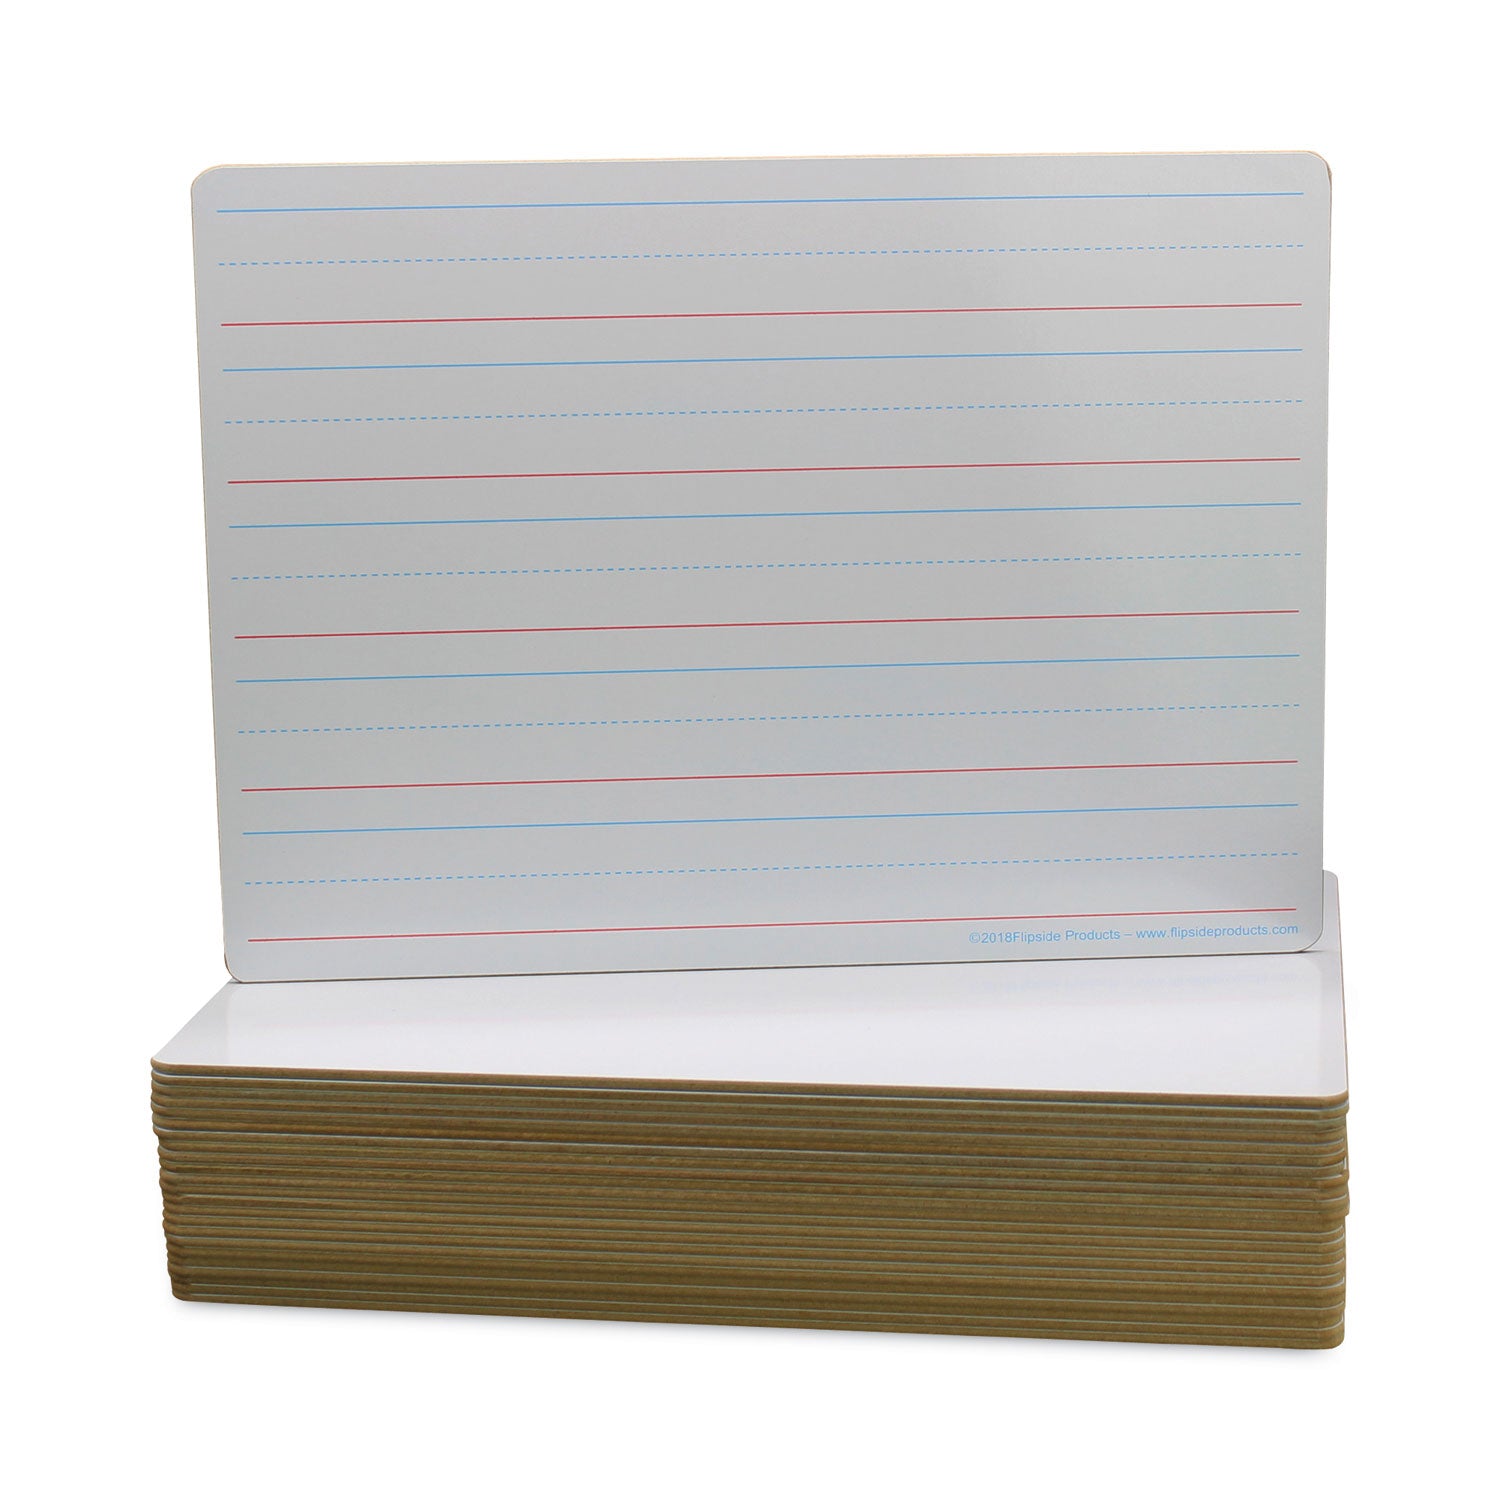 two-sided-red-and-blue-ruled-dry-erase-board-12-x-9-ruled-white-front-unruled-white-back-24-pack_flp12034 - 2